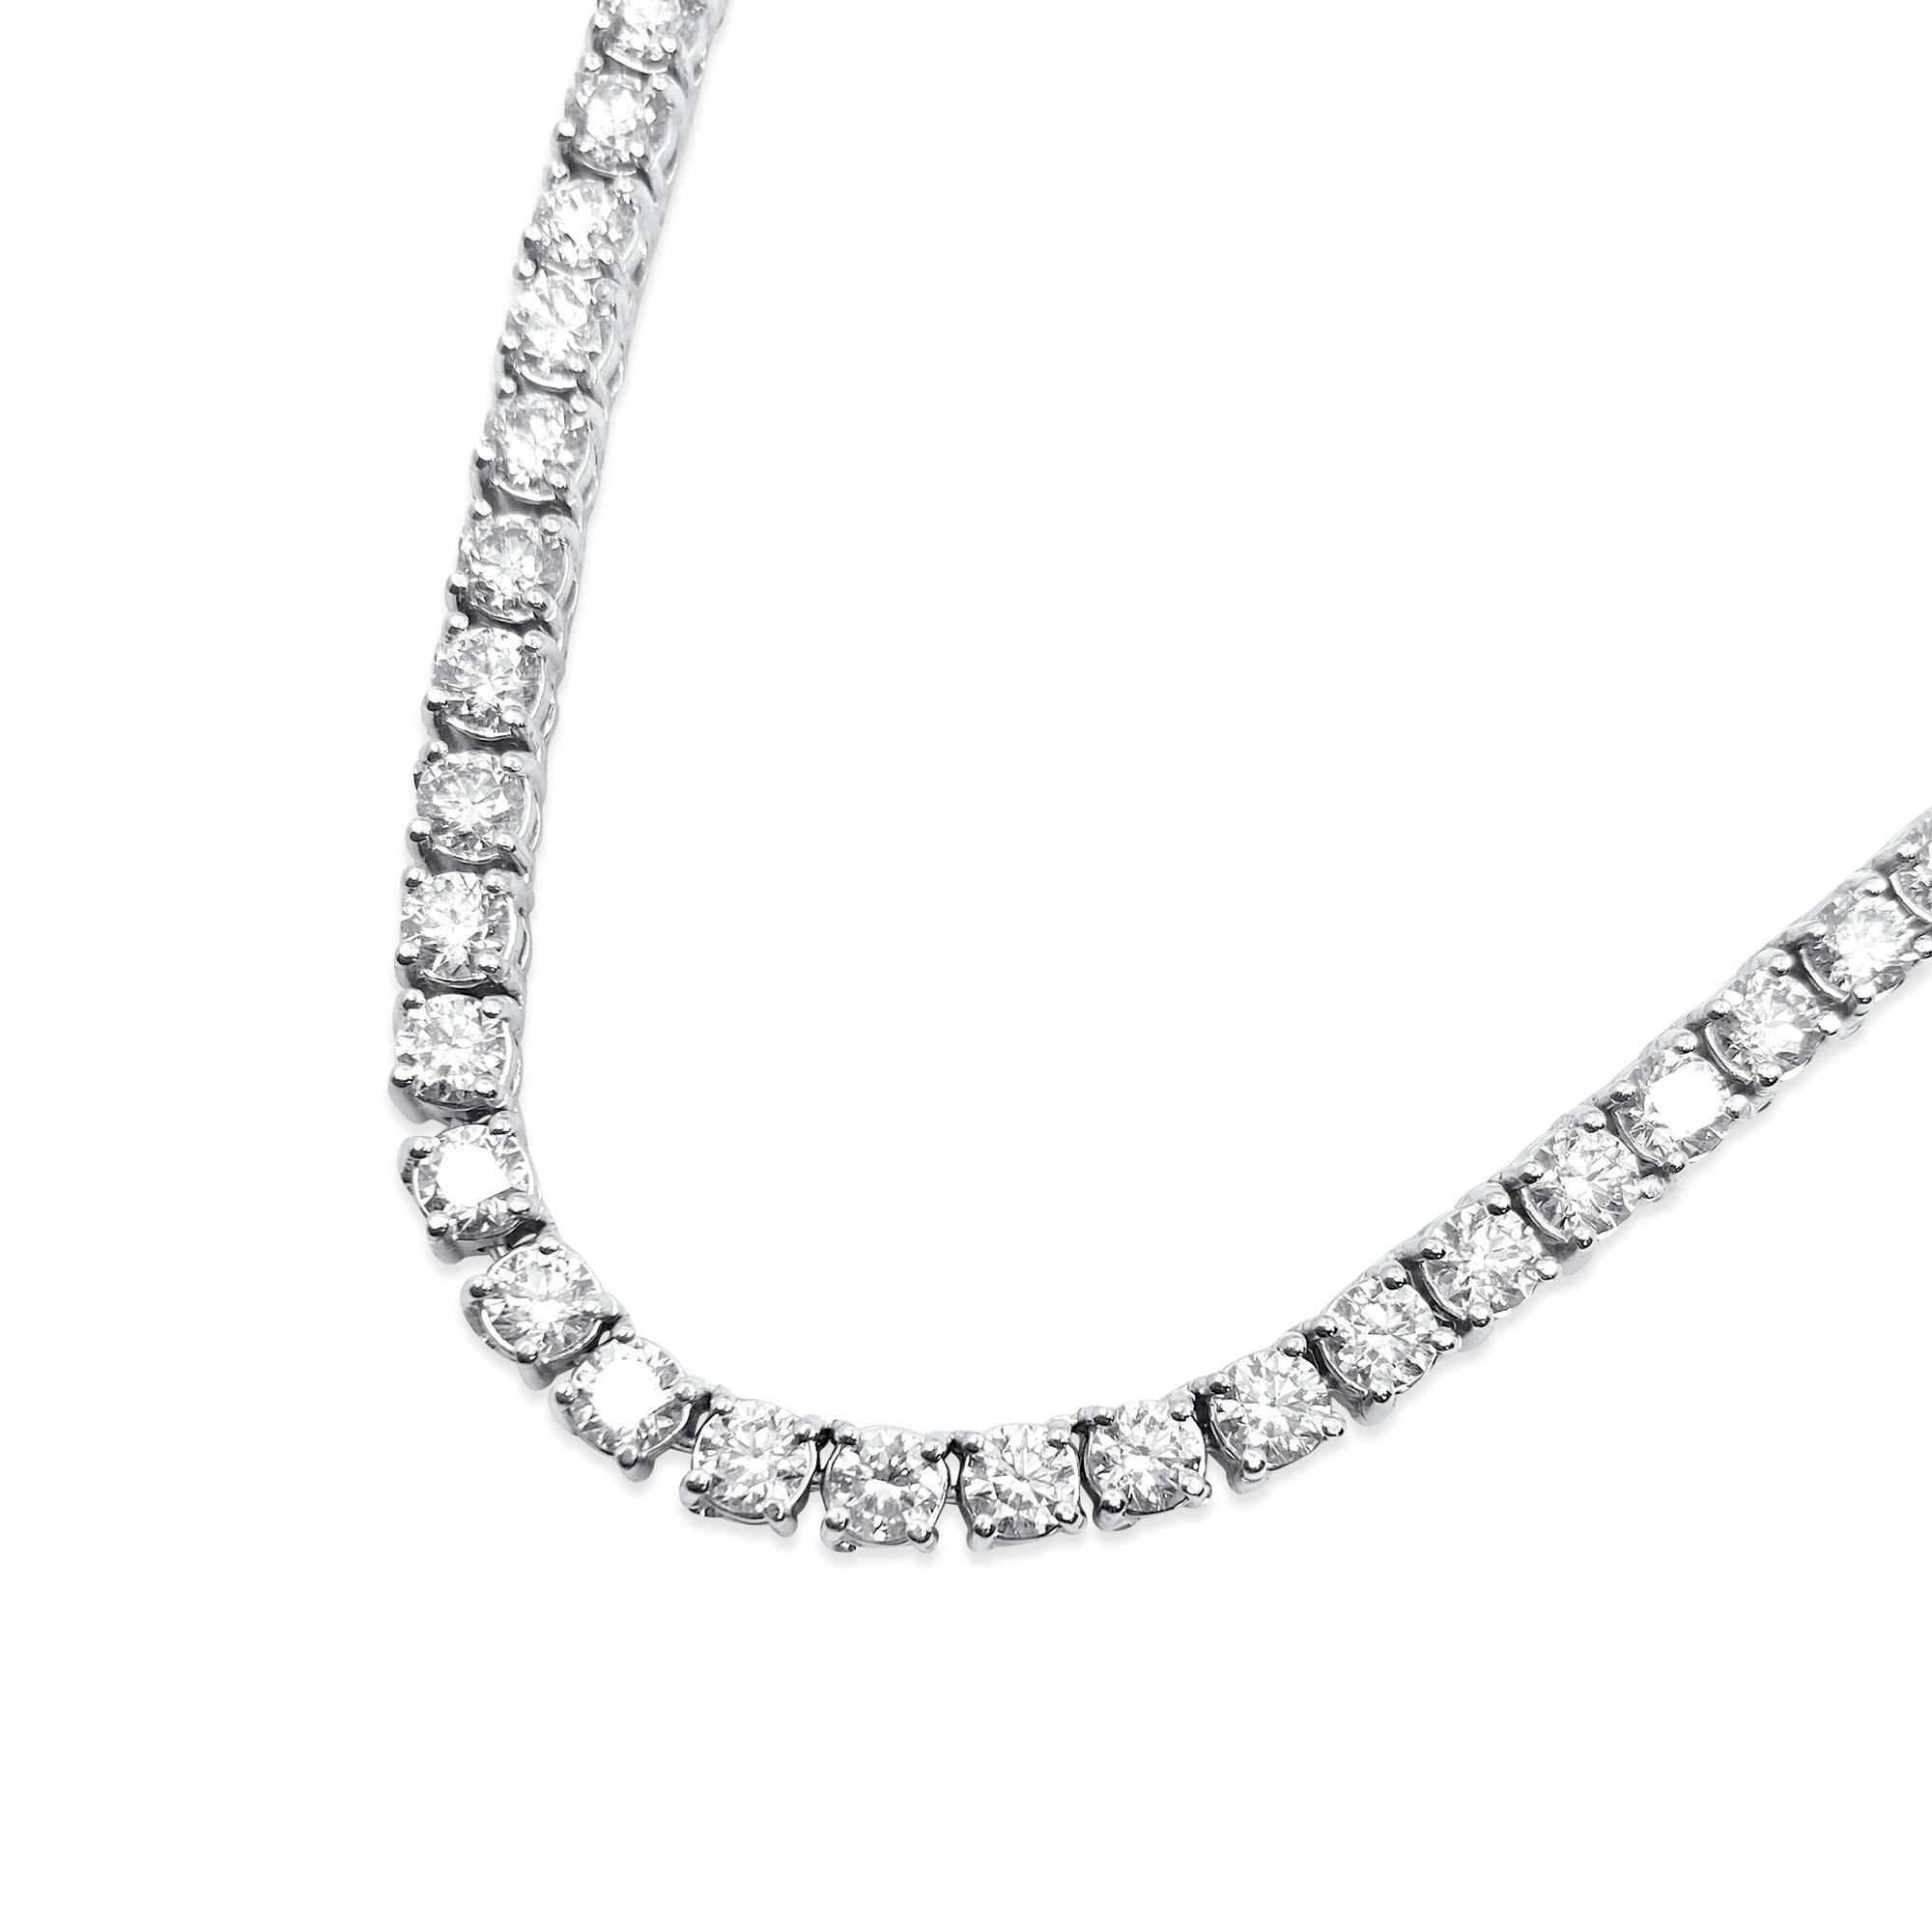 This necklace is made of 14-karat white gold. The diamonds on it weigh 26 carats and have very, very slight (VVS) clarity and are in an H color. These diamonds are all natural and mined from the earth. They are cut in a round brilliant style, making